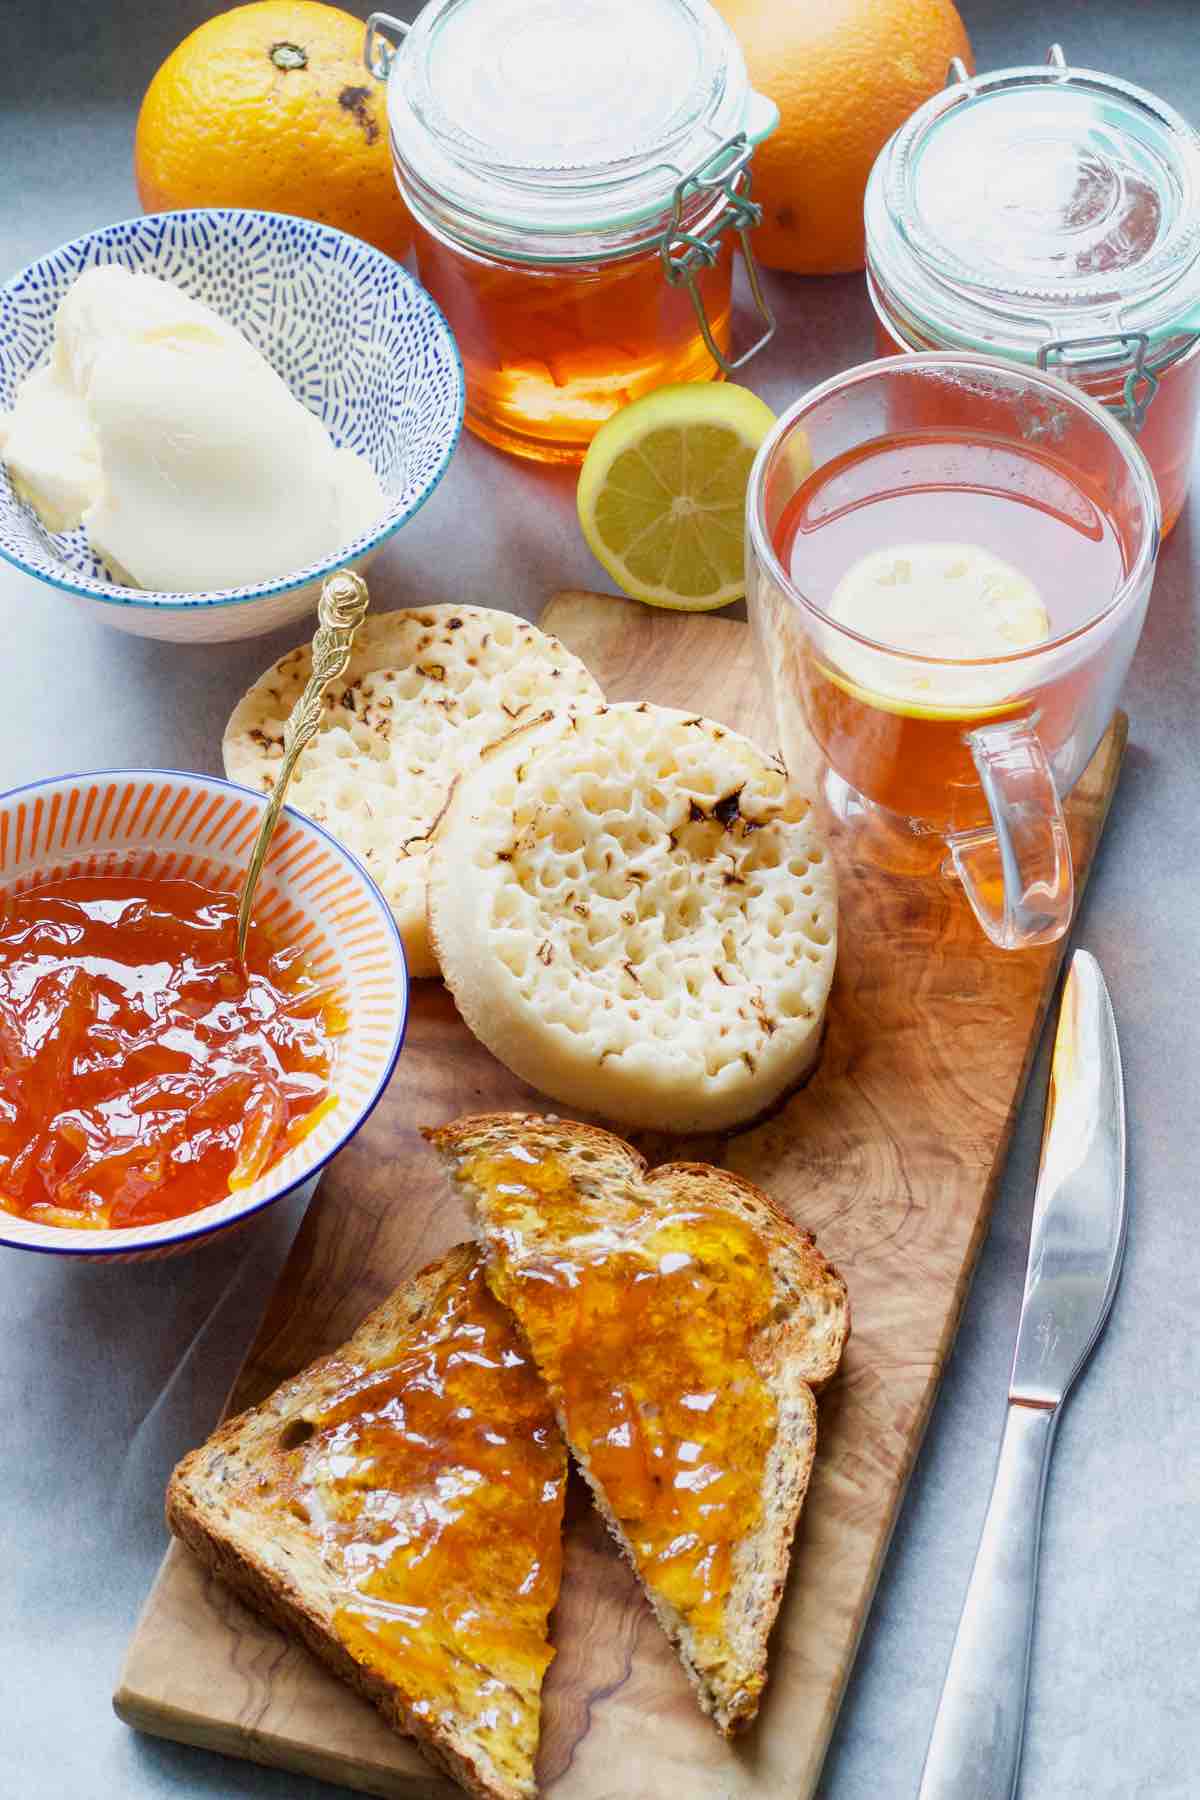 Breakfast set up with tea, toast, crumpets, butter and marmalade.